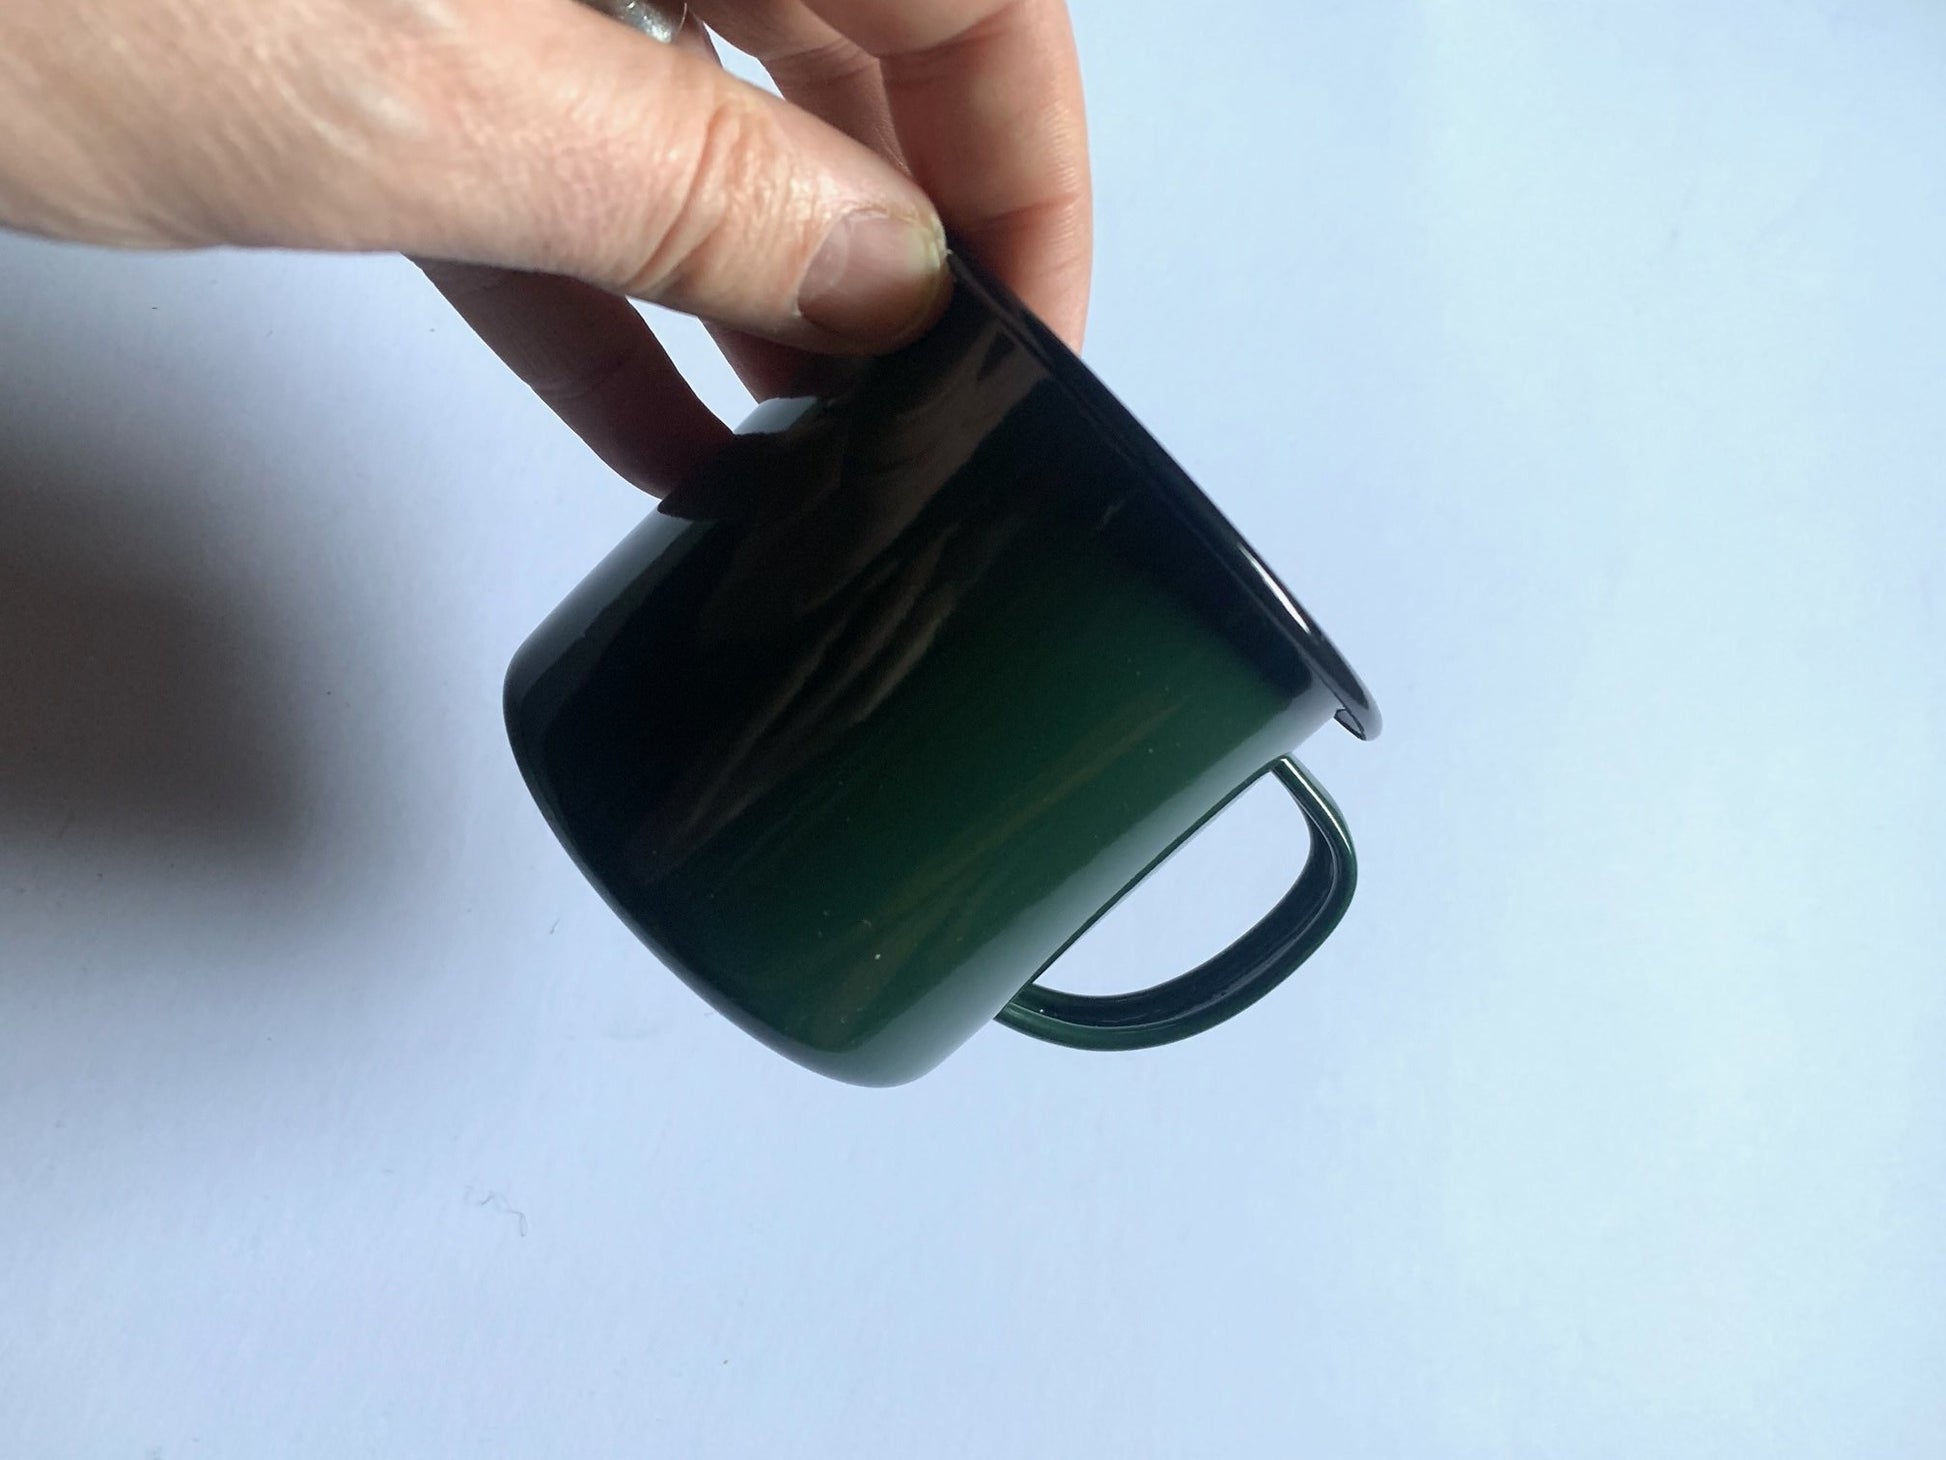 Green enamelware espresso cup from original enamelware brand Falcon which is oven, dishwasher, freezer, electric and gas hob friendly.